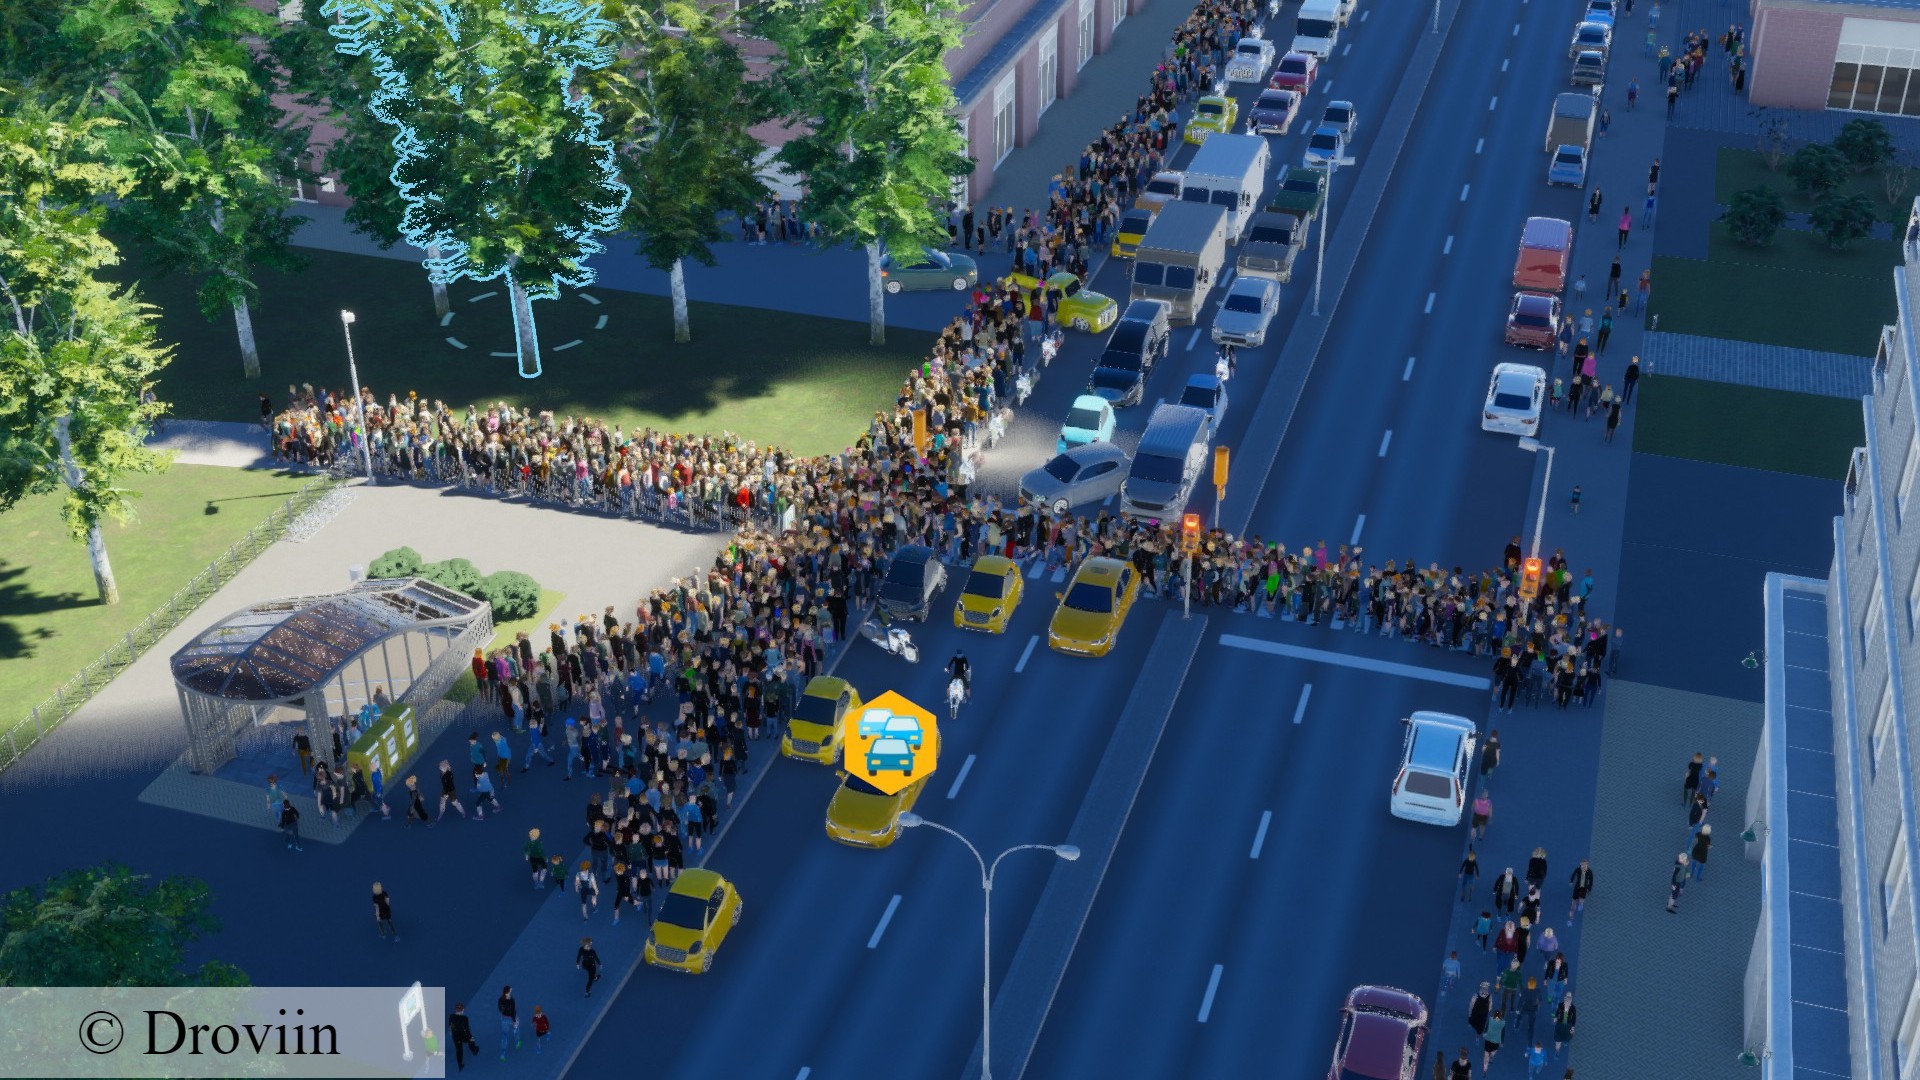 Cities Skylines 2 jaywalking: A busy street full of pedestrians in Colossal Order city building game Cities Skylines 2